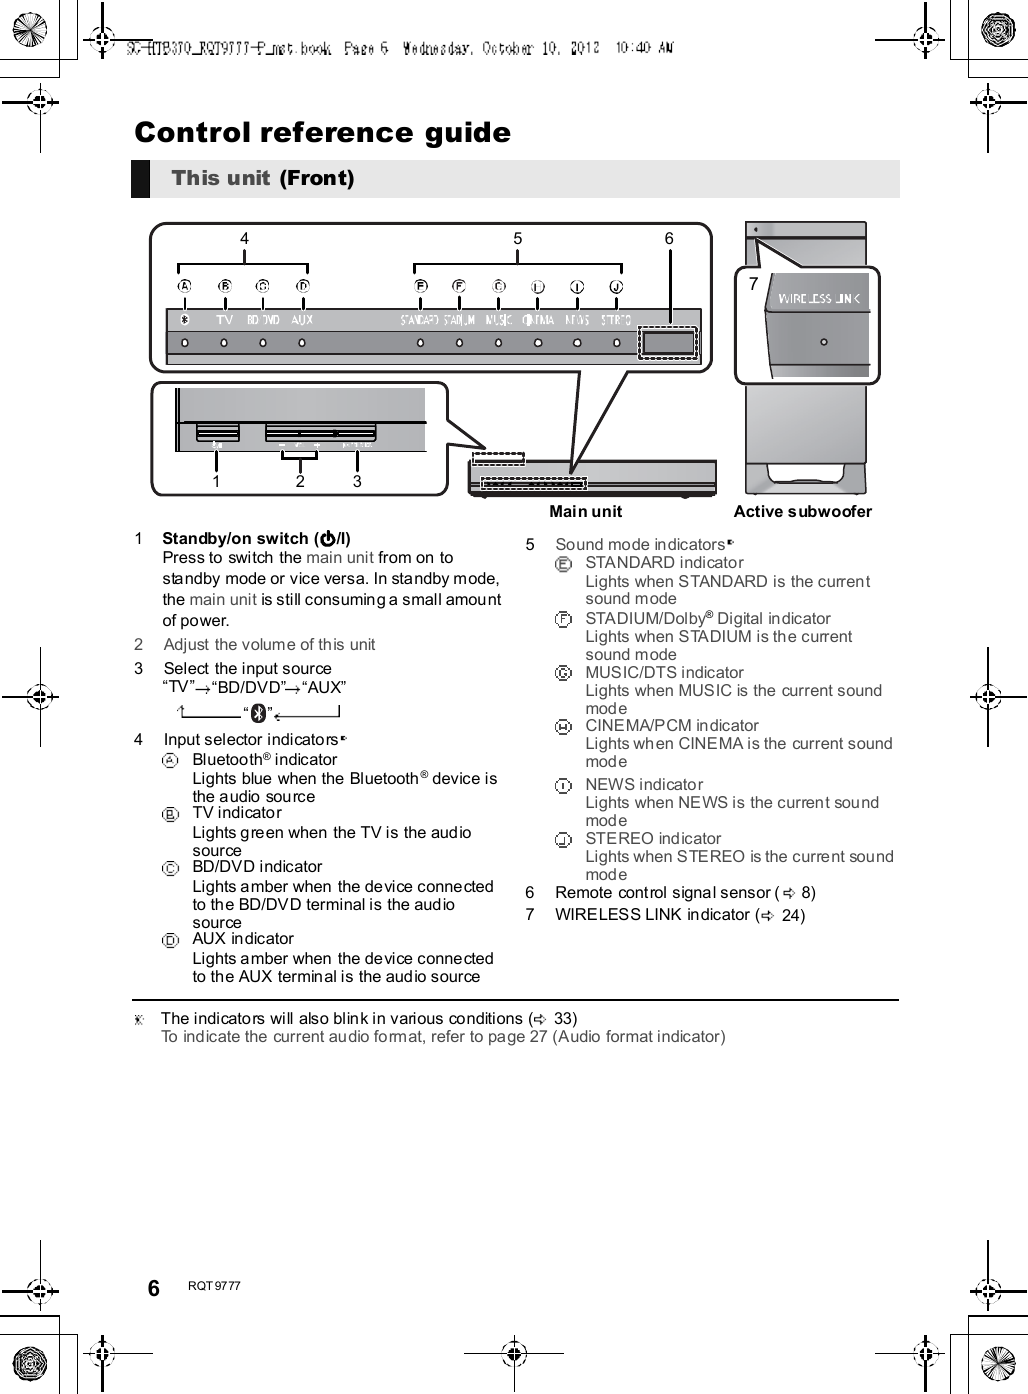 6R QT 97 77Control reference guide1Standby/on switch ( /I)Press to switch the main unit from on tostandby mode or vice versa. In standby mode,the main unit is still consuming a small amountof power.2 Adjust the volume of this unit3 Select the input sourceTVBD/DVDAUX4 Input selector indicatorsBluetooth® indicatorLights blue when the Bluetooth ® device isthe audio sourceTV indicatorLights green when the TV is the audiosourceBD/DVD indicatorLights amber when the device connectedto the BD/DVD terminal is the audiosourceAUX indicatorLights amber when the device connectedto the AUX terminal is the audio source5Sound mode indicatorsSTANDARD indicatorLights when STANDARD is the currentsound modeSTADIUM/Dolby® Digital indicatorLights when STADIUM is the currentsound modeMUSIC/DTS indicatorLights when MUSIC is the current soundmodeCINEMA/PCM indicatorLights when CINEMA is the current soundmodeNEWS indicatorLights when NEWS is the current soundmodeSTEREO indicatorLights when STEREO is the current soundmode6 Remote control signal sensor ( 8)7 WIRELESS LINK indicator ( 24)  The indicators will also blink in various conditions ( 33)To indicate the current audio format, refer to page 27 (Audio format indicator)This unit  (Front)71234 56Main unitActive subwoofer